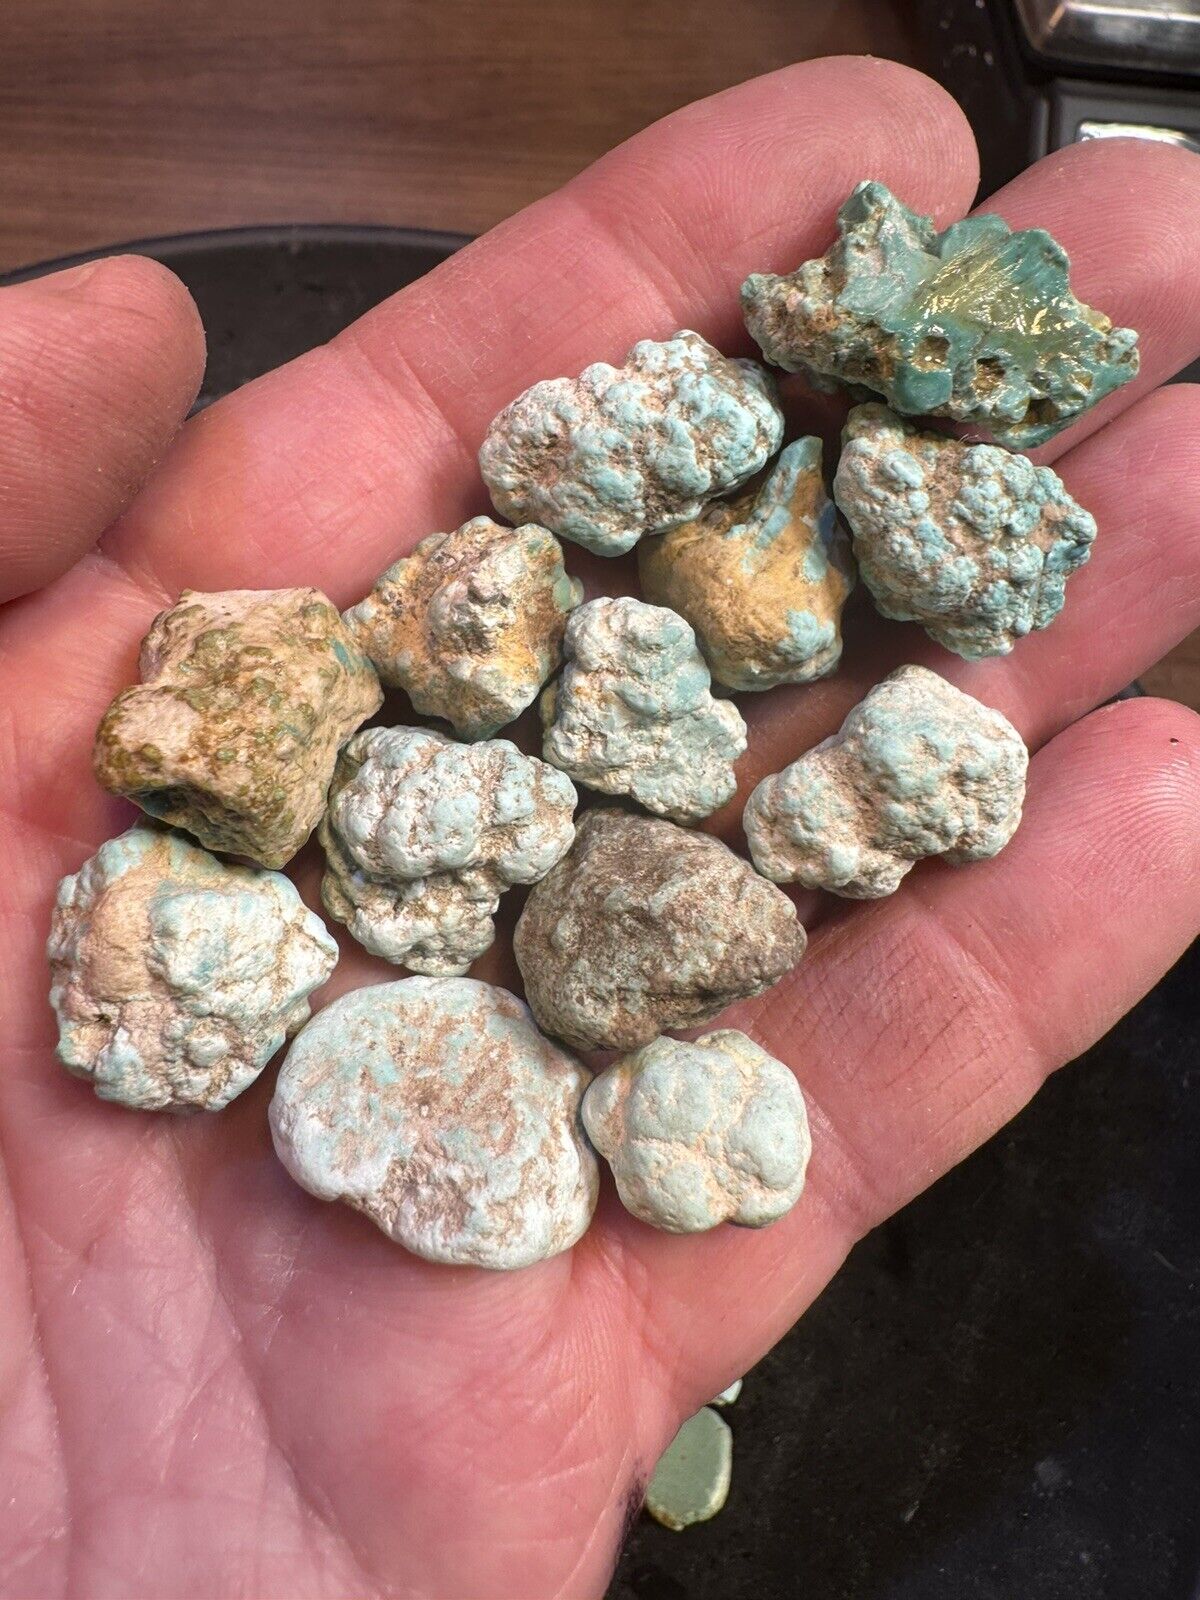 NEW AD💥Castle Dome Natural Gem Hard Turquoise/Old Bell Nugs  190 grams.💥